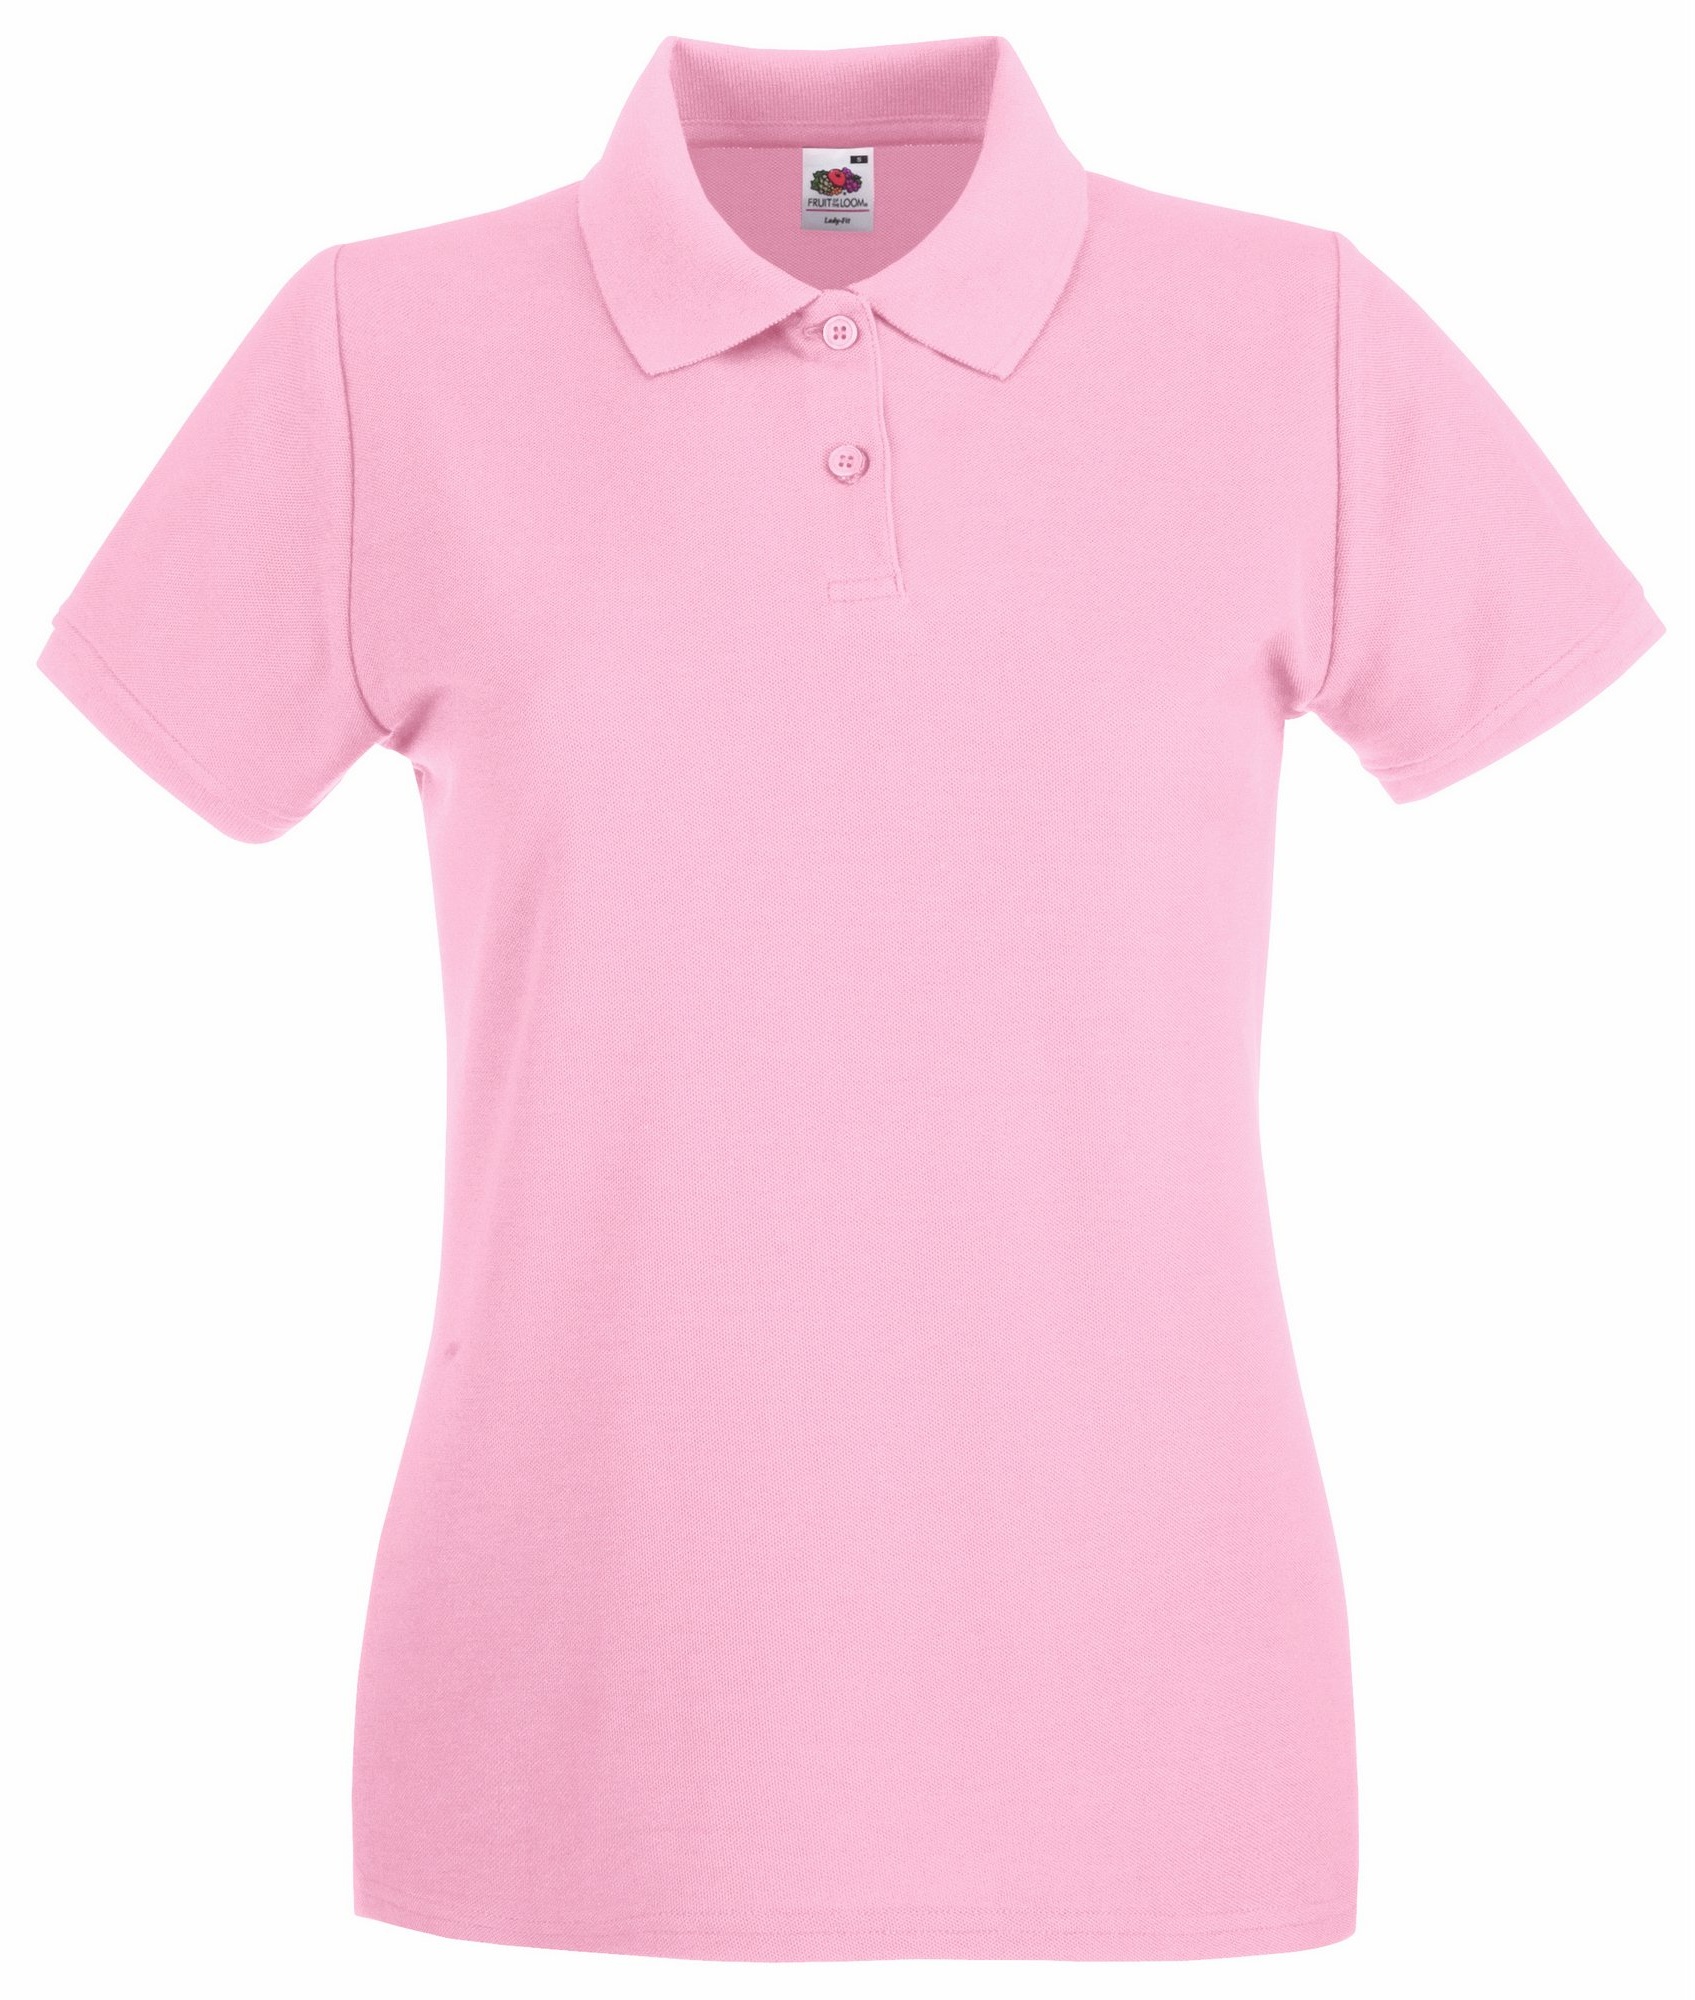 Fruit of the Loom: Lady-Fit Premium Polo 63-030-0, Größe:M (12);Farbe:Light Pink